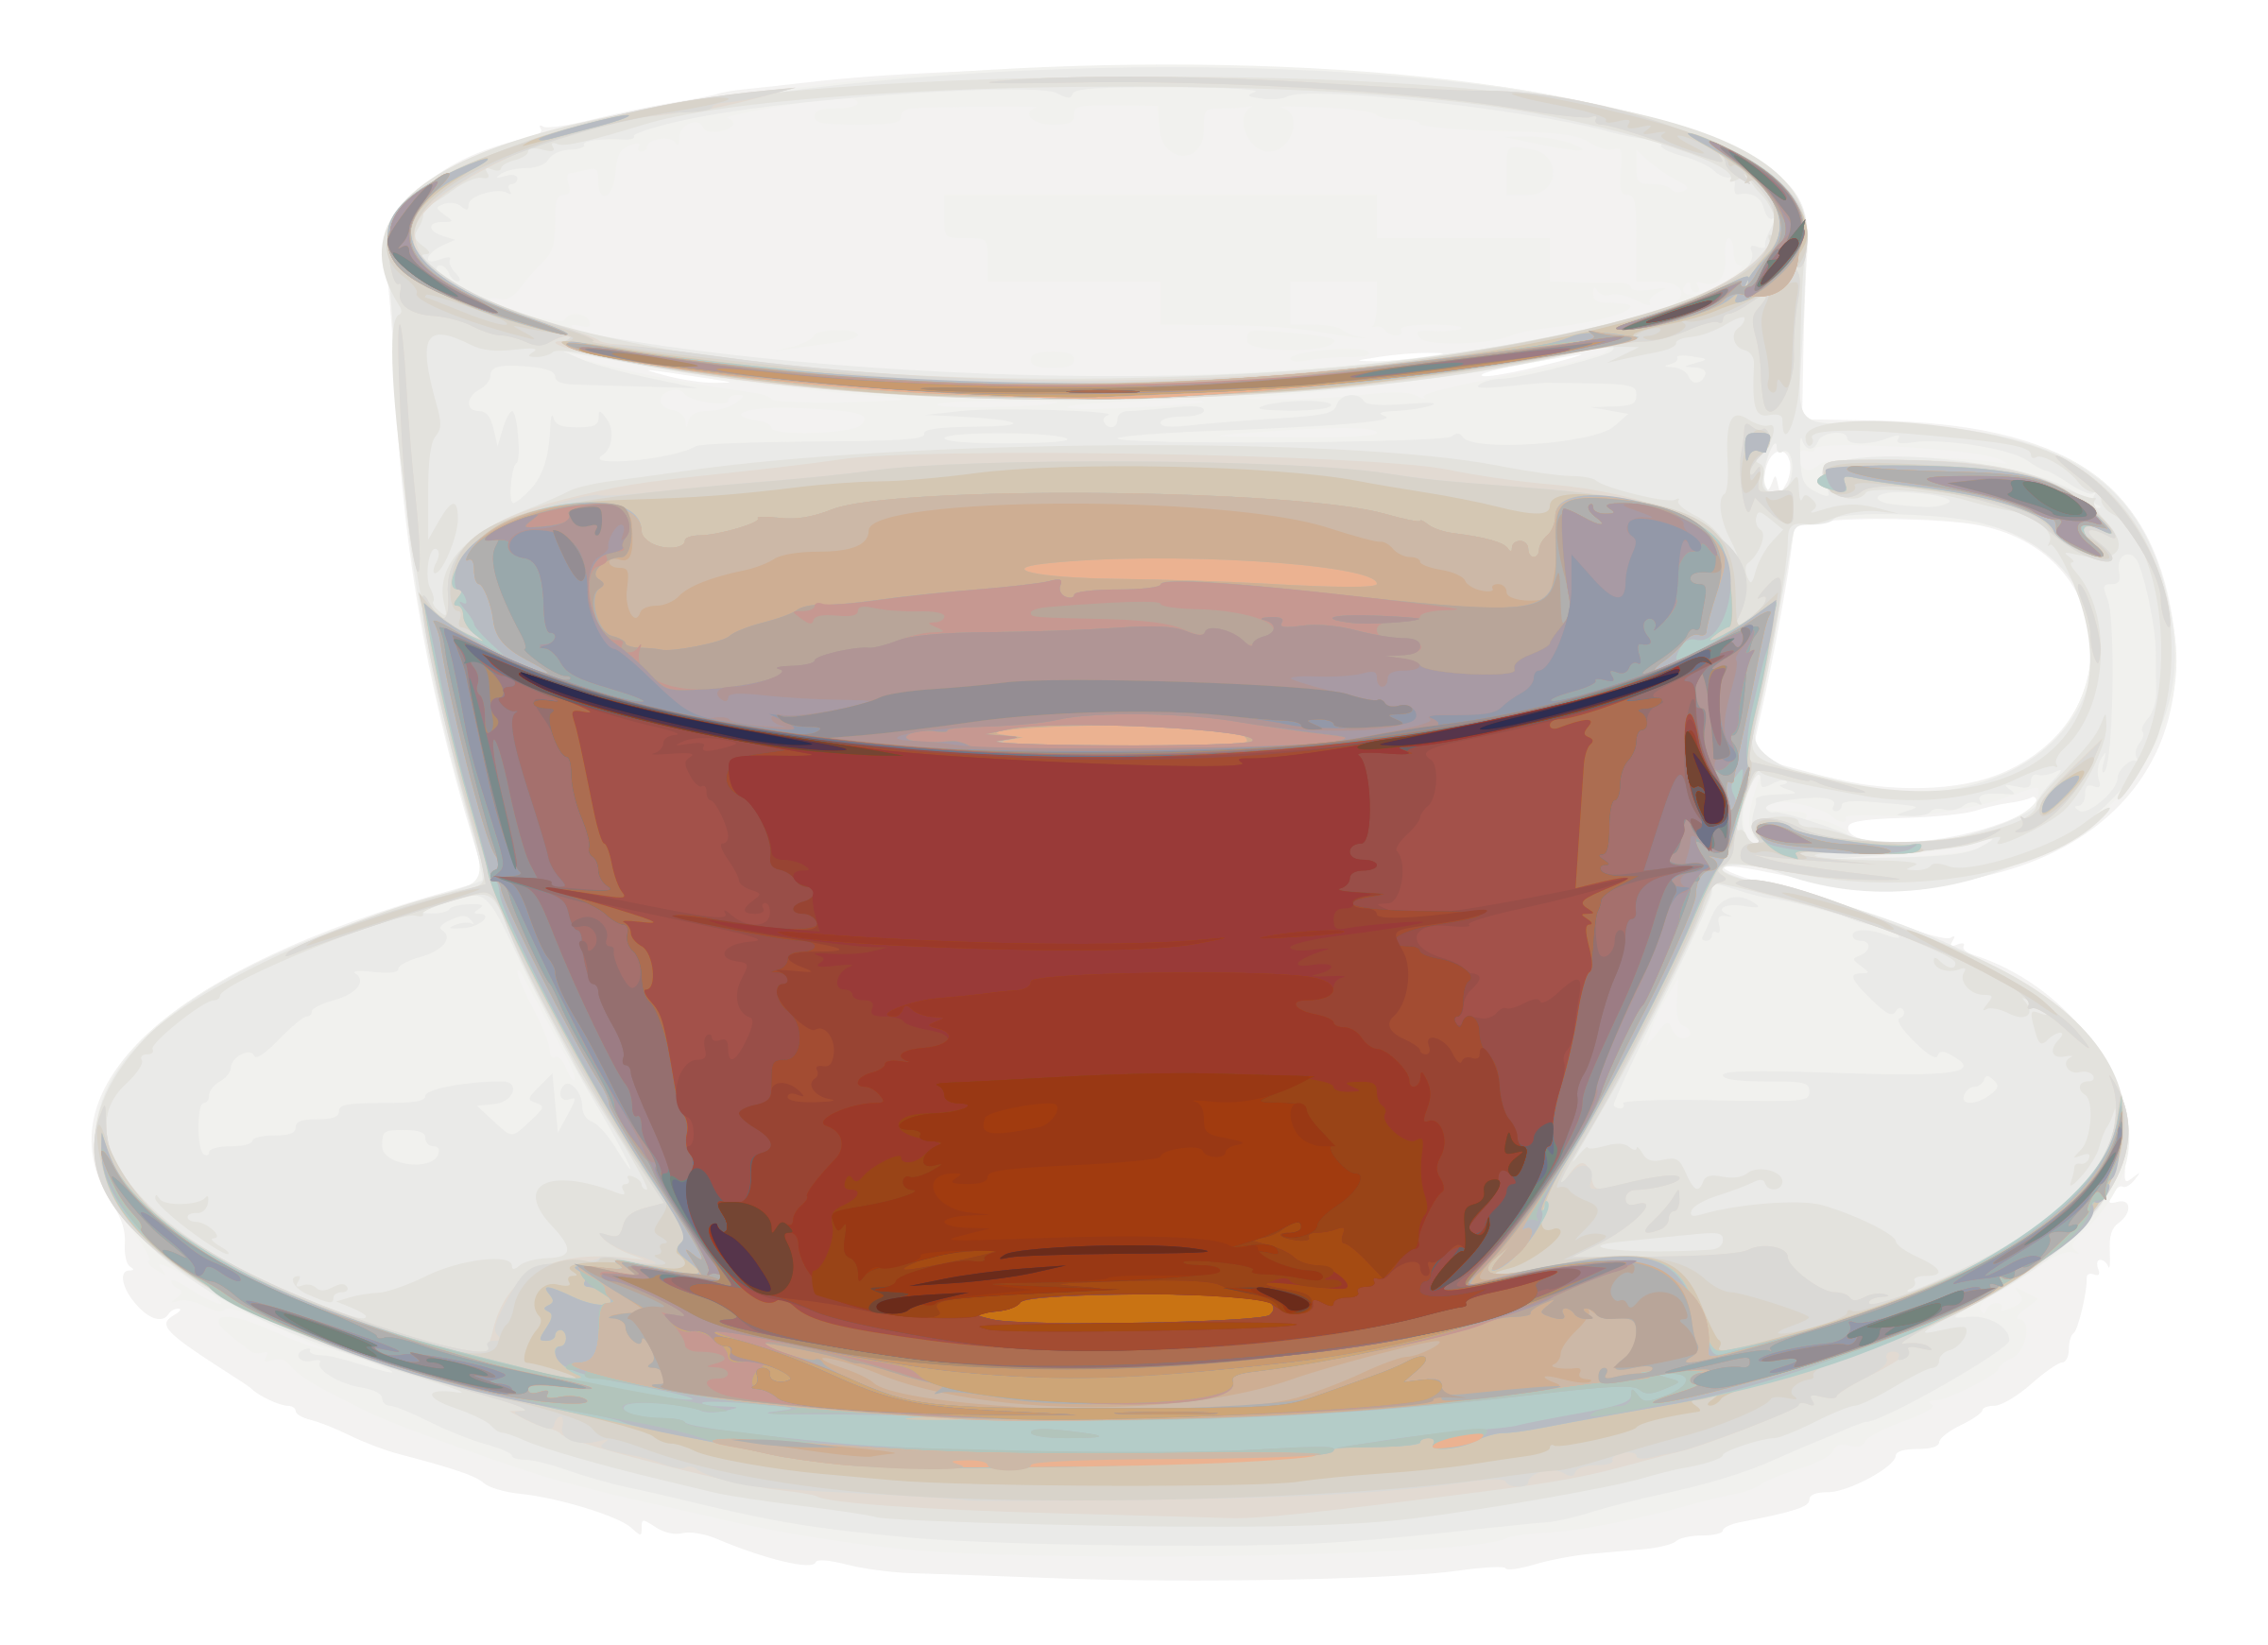 Cup Png Image - Cup Of Tea, Transparent background PNG HD thumbnail